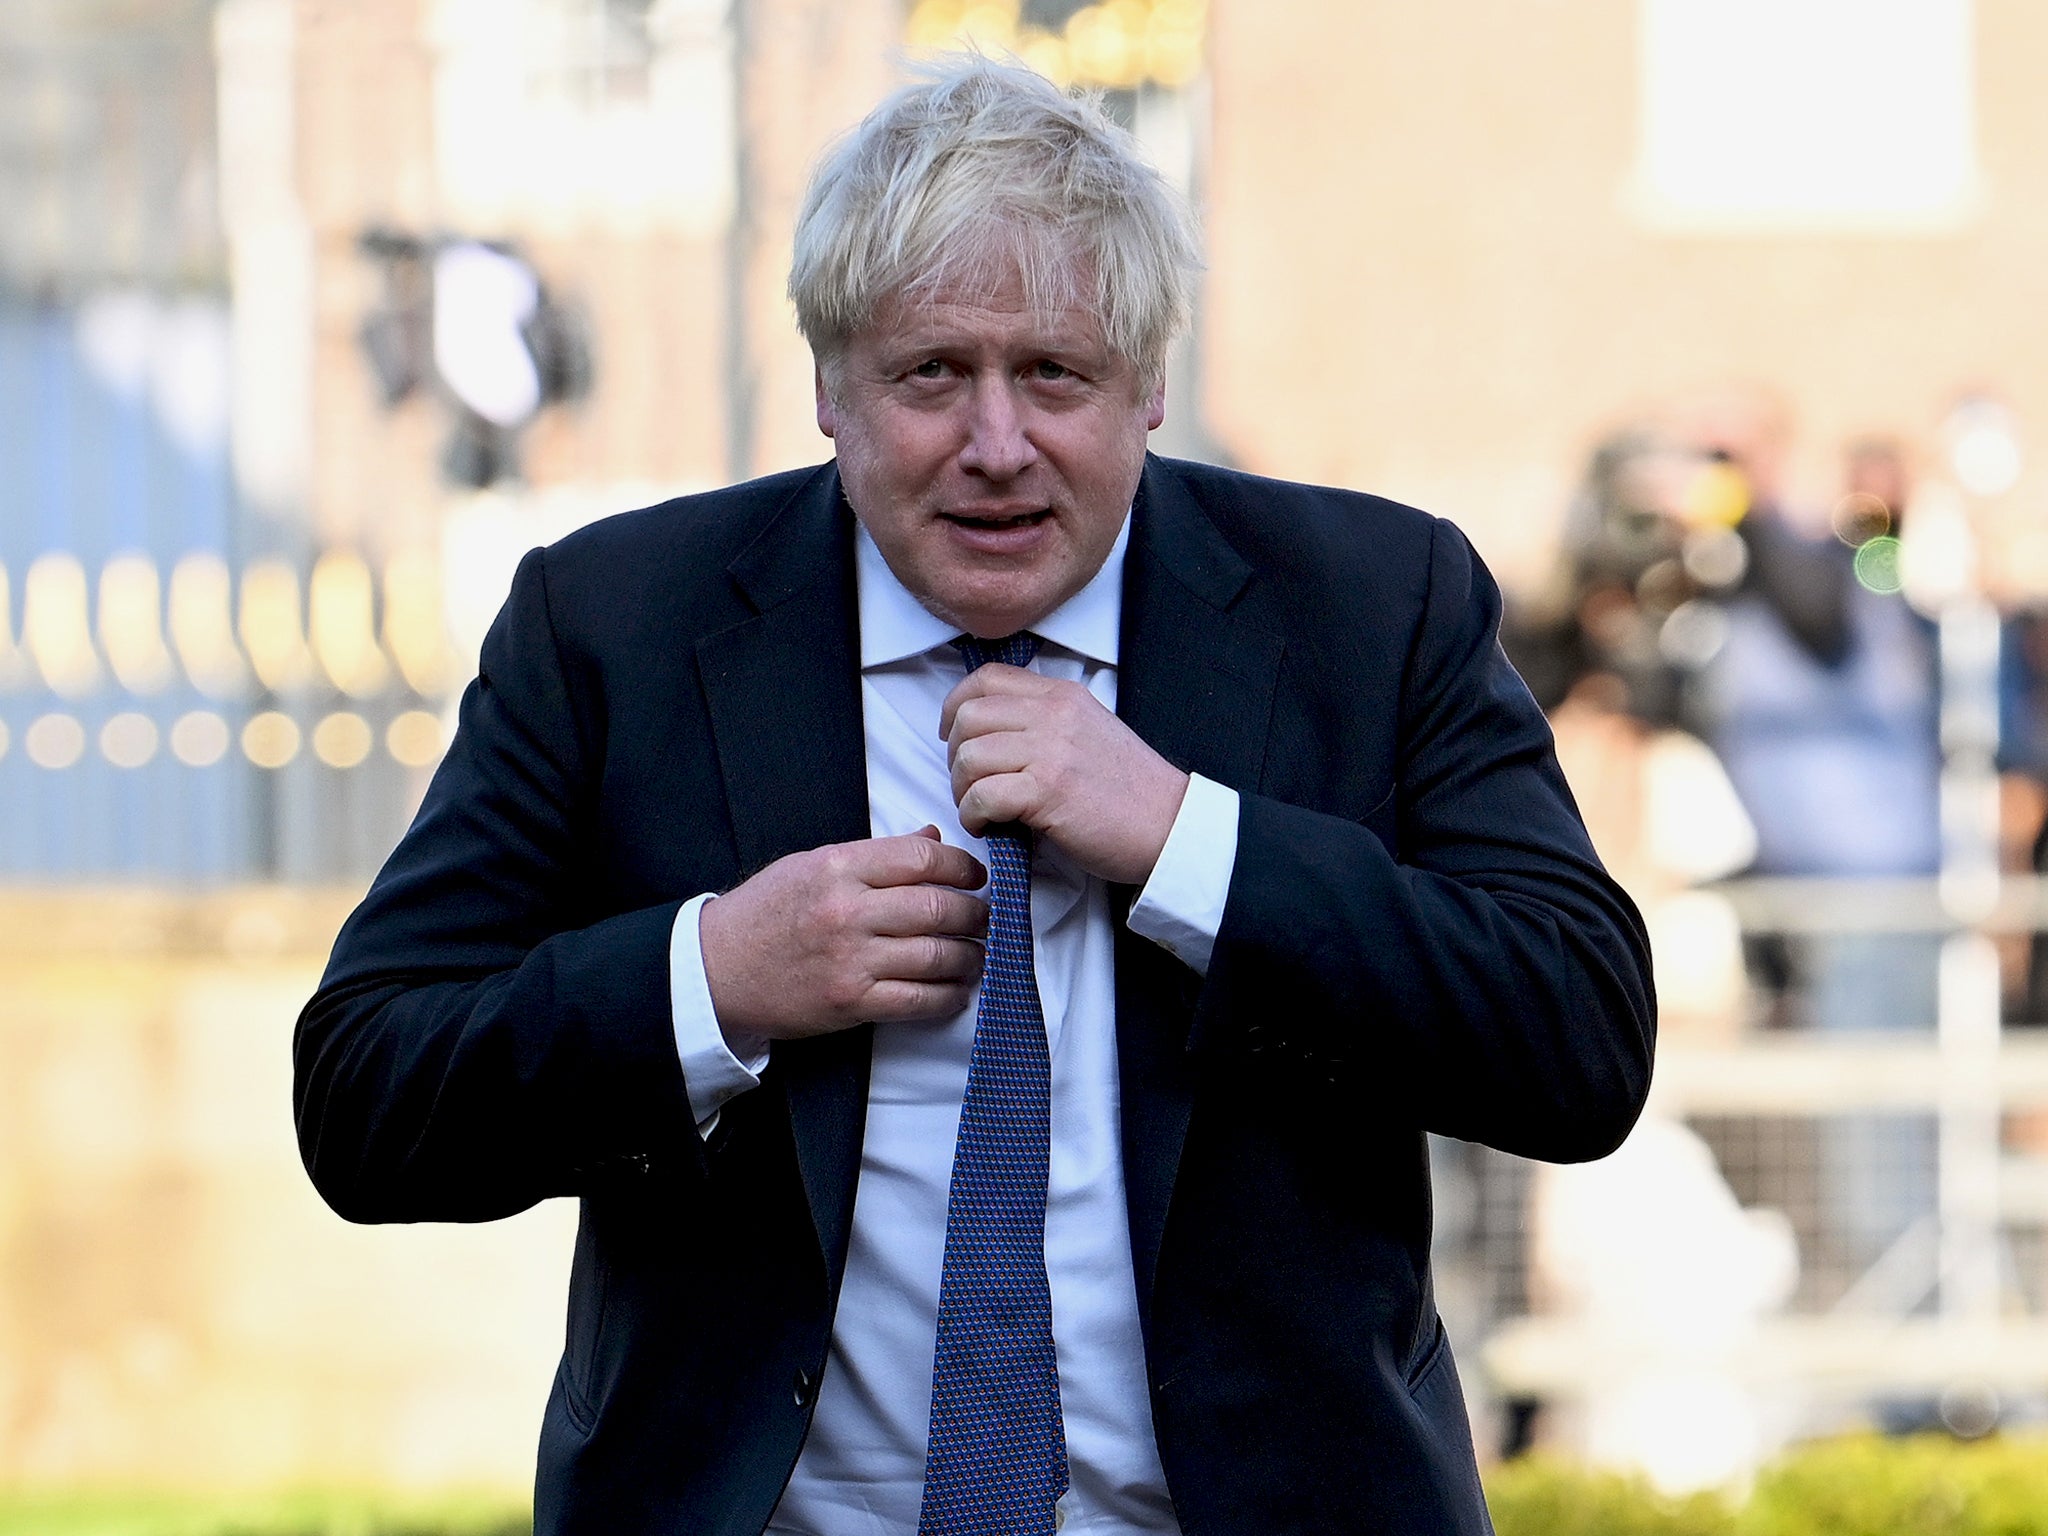 A proper Commons vote would show how little support Johnson has